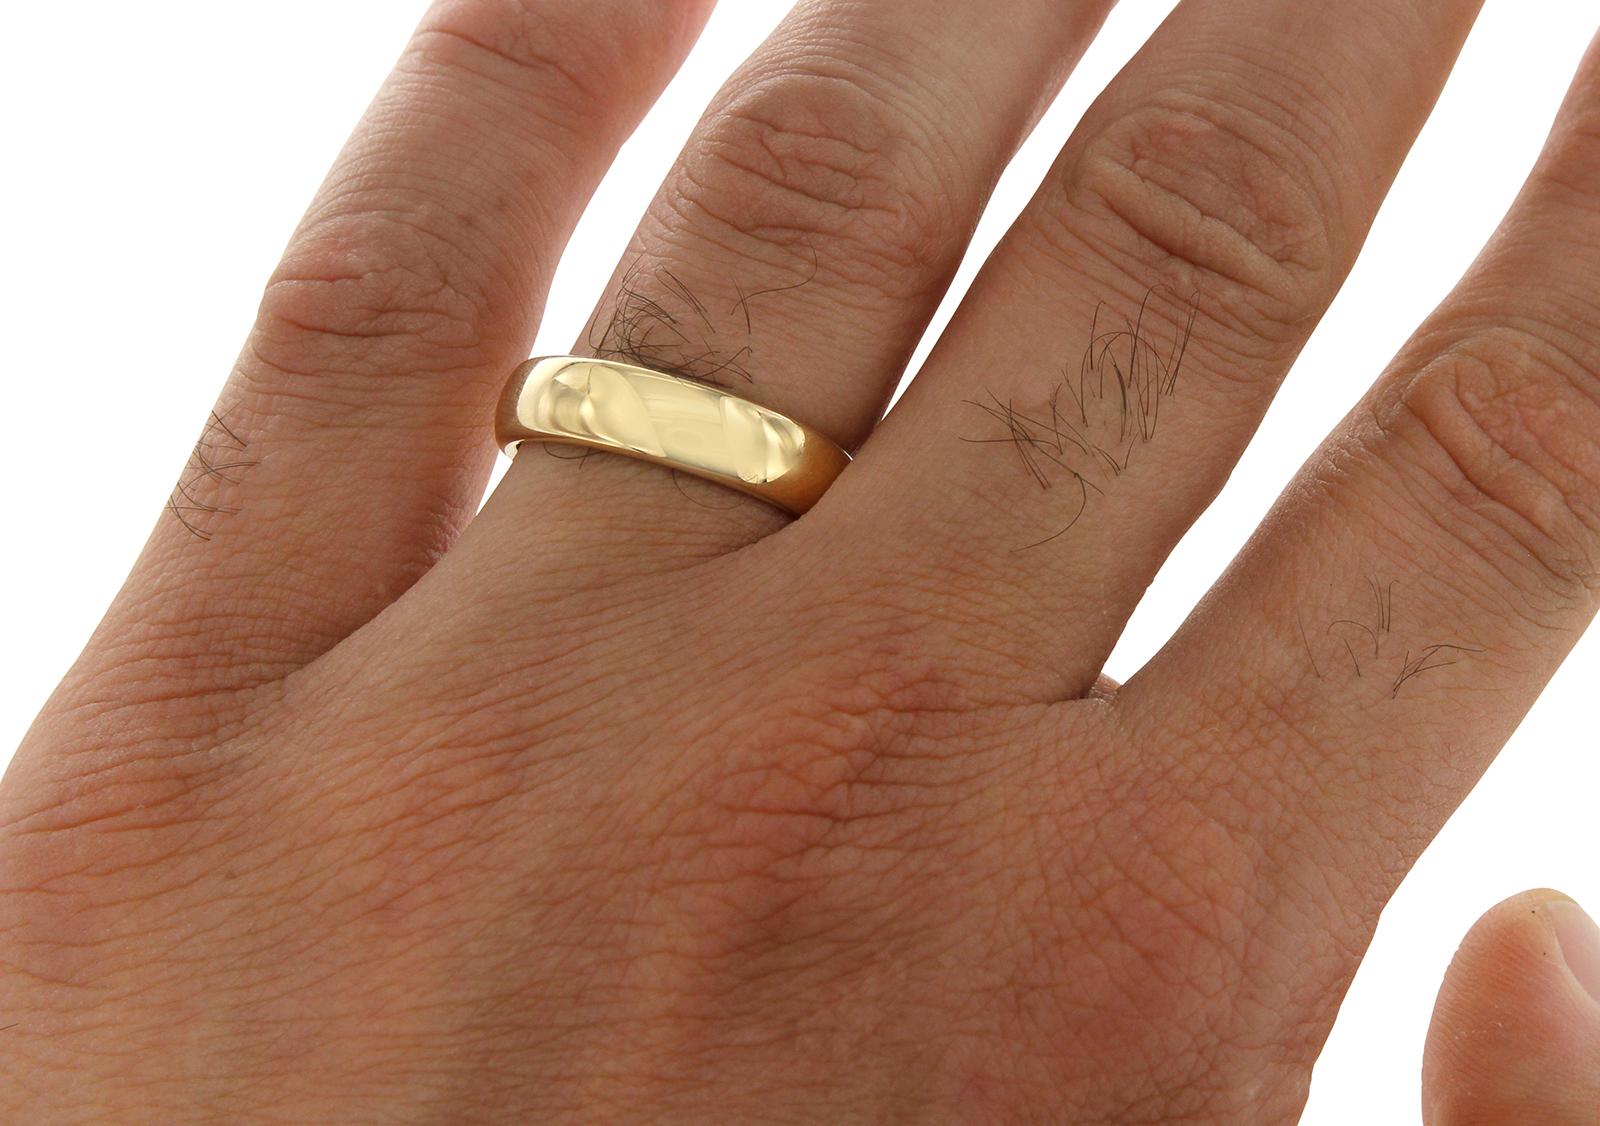 Type: Ring
Top: 6 mm
Band Width: 6 mm
Metal: Yellow Gold
Metal Purity: 18K
Hallmarks: Tiffany and Co 1999 750
Total Weight: 12 Grams
Stone Type: None
Condition: Pre-Owned
Stock Number: ED35